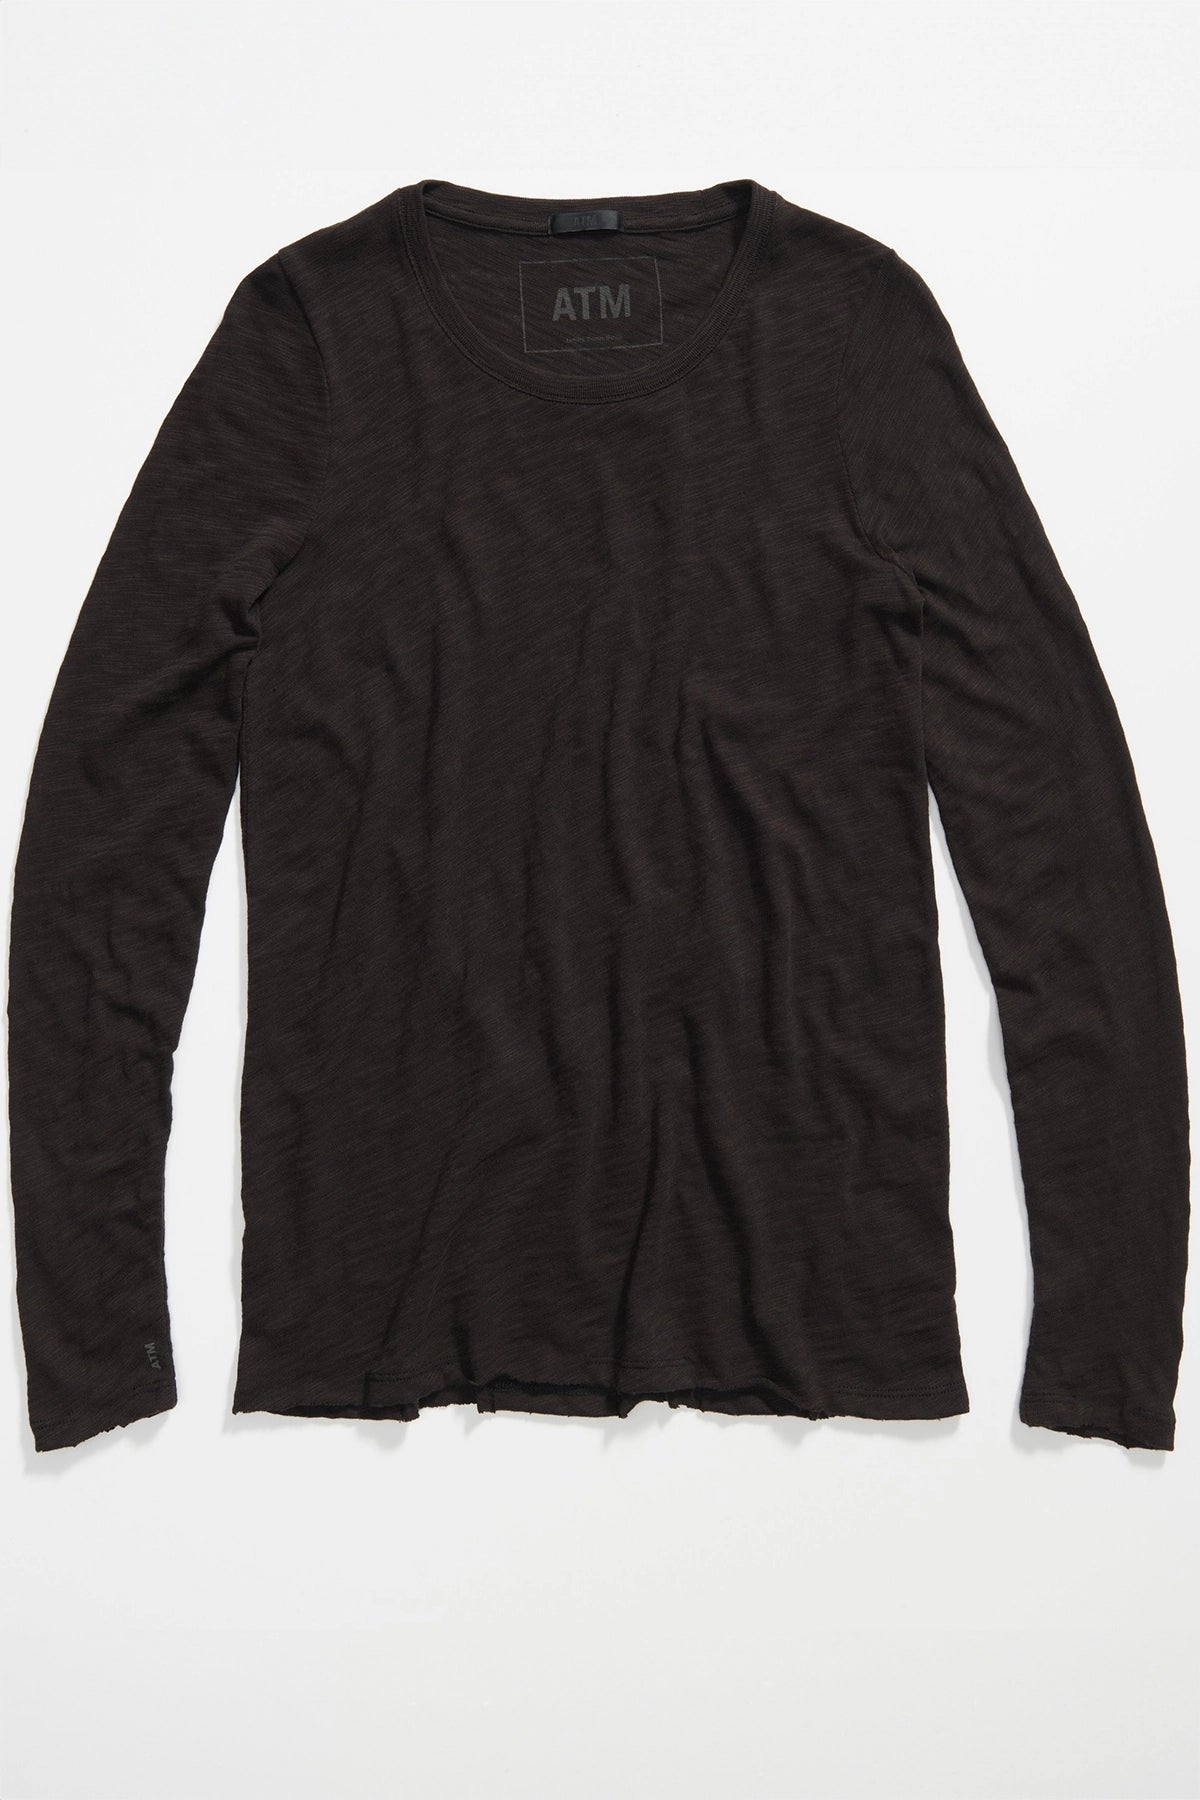 ATM Destroyed Long Sleeve Crew Top